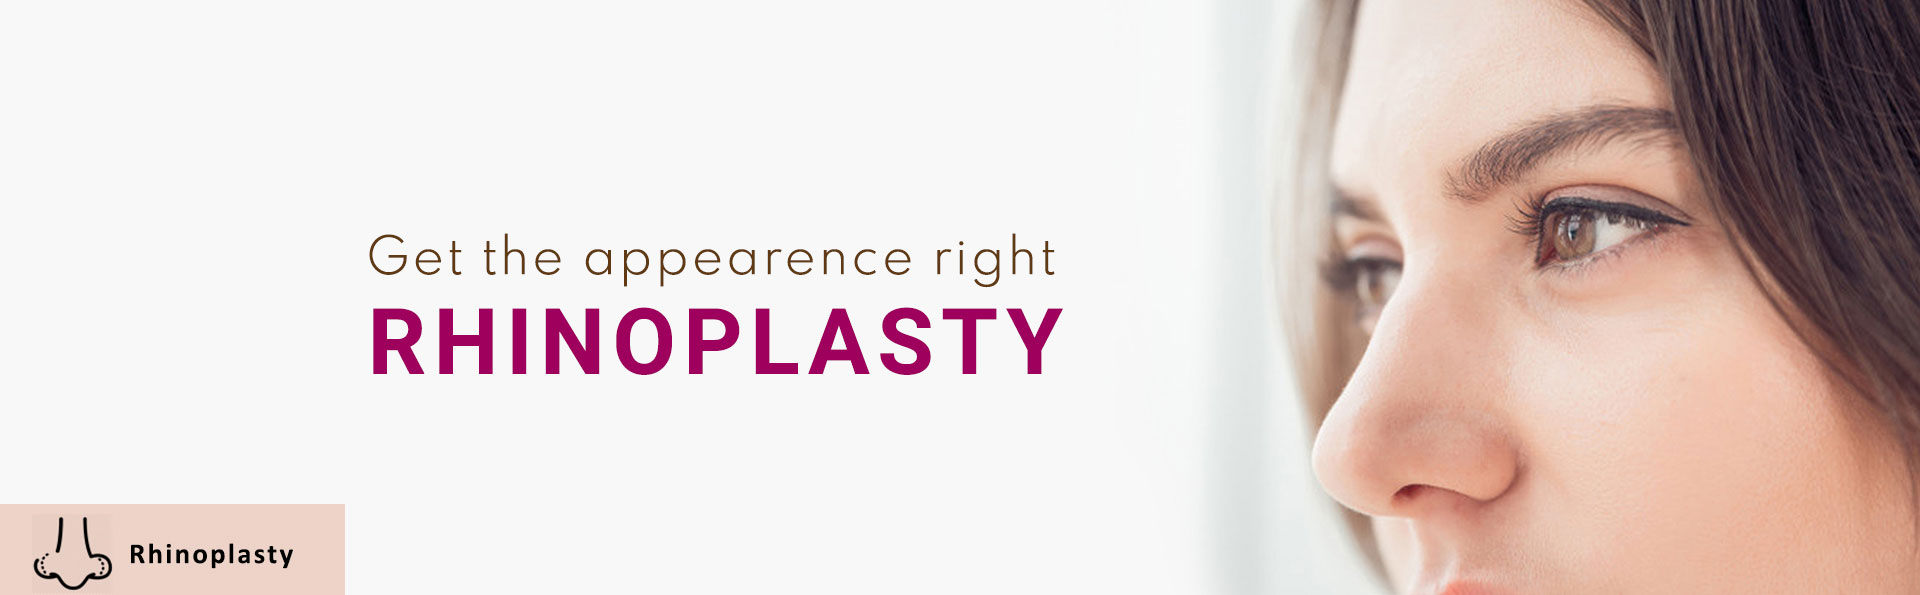 Rhinoplasty - Nose Reshaping Treatment | Novacosmetic surgery clinic